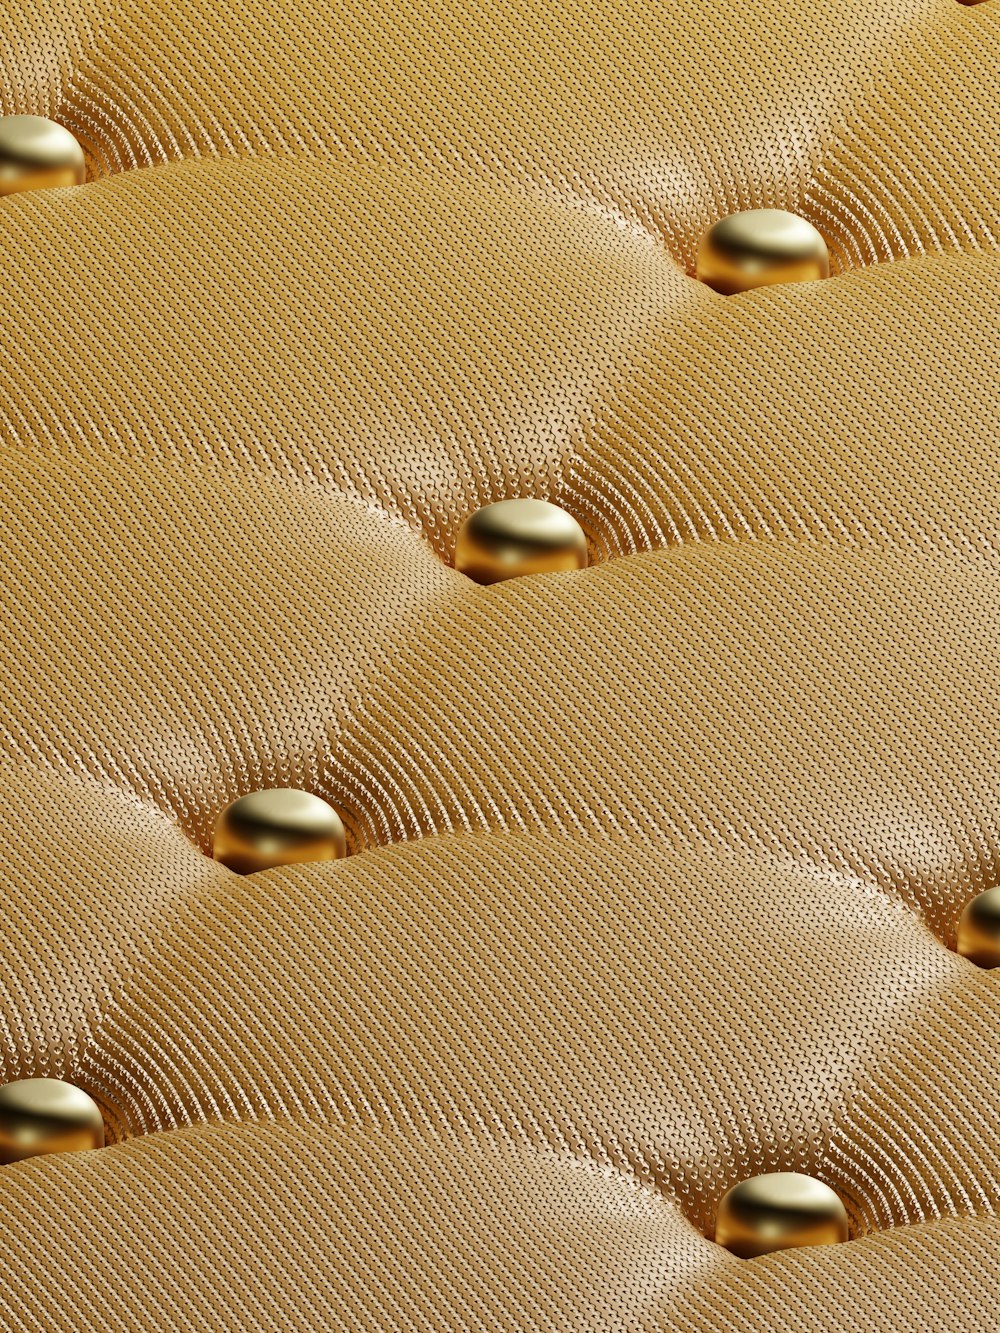 a close up view of a gold colored mattress